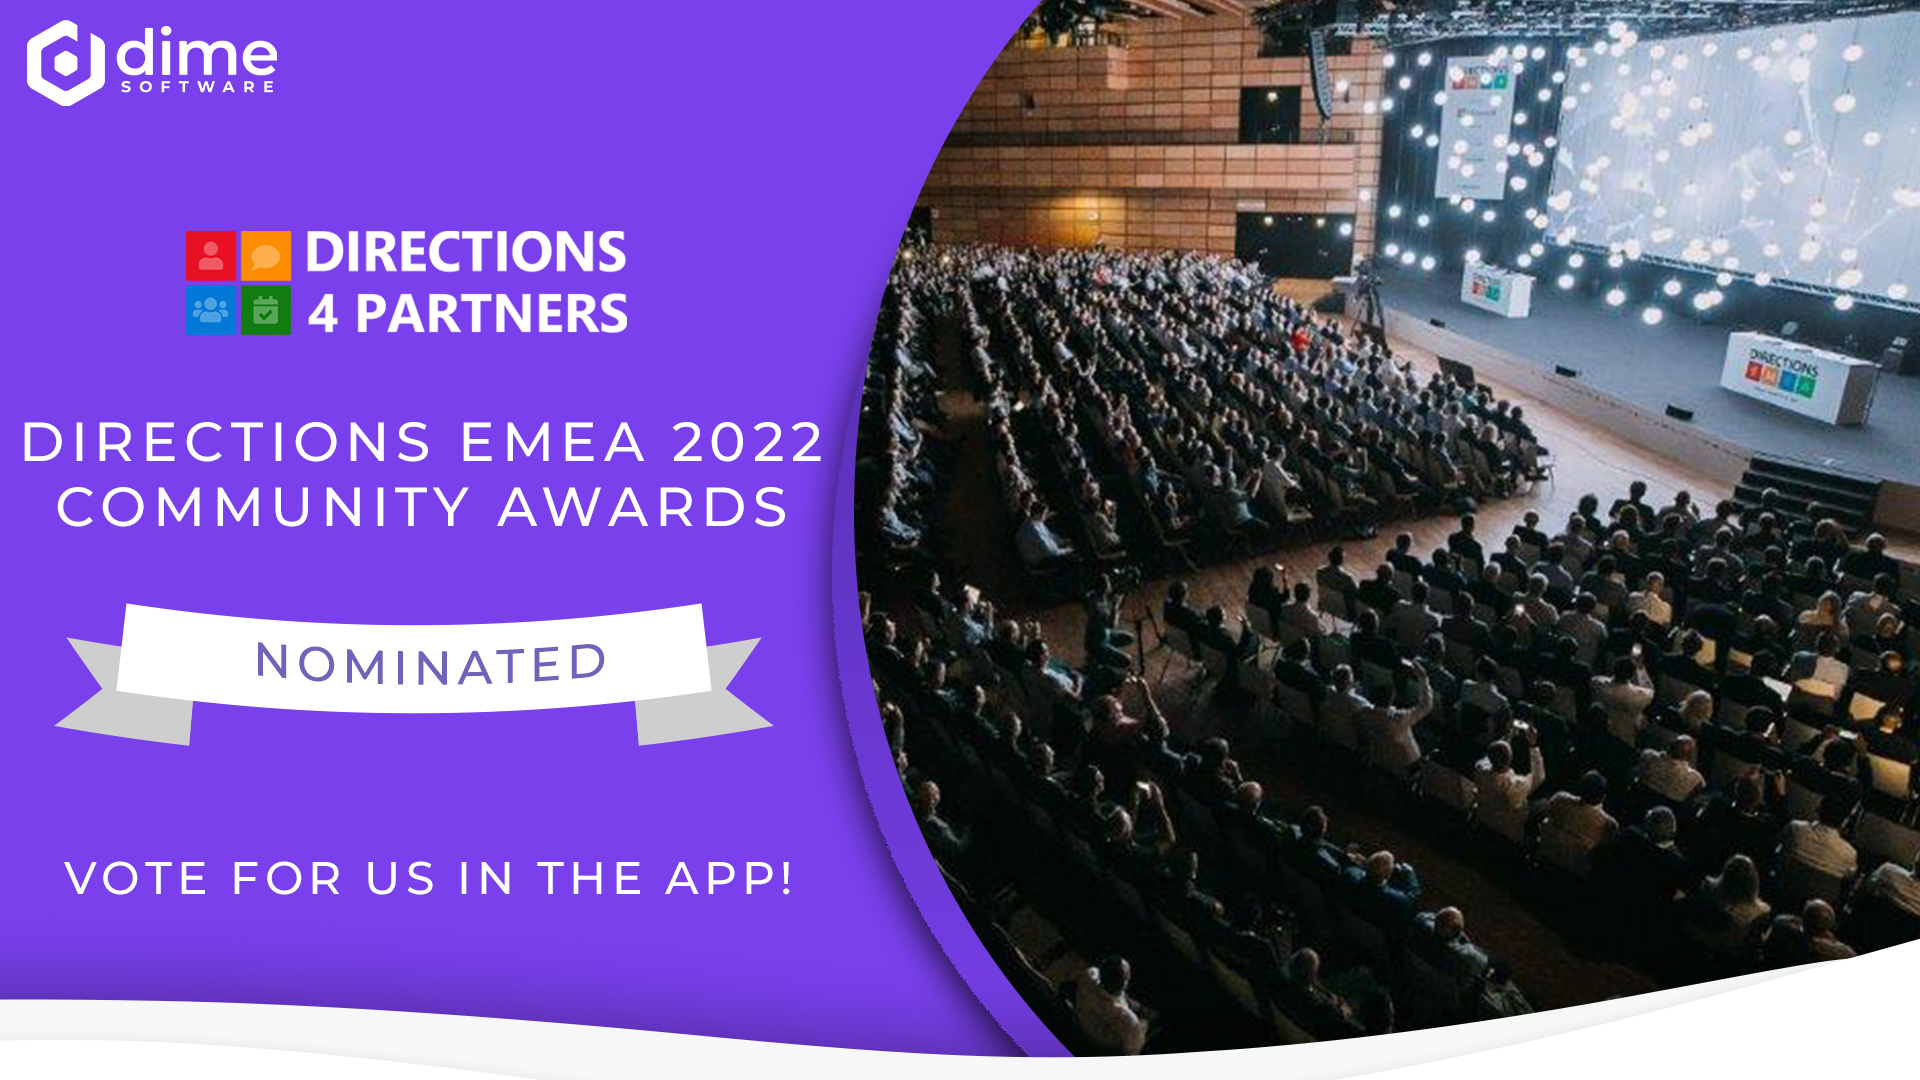 ds-directions-emea-2022-nominations-wide.png